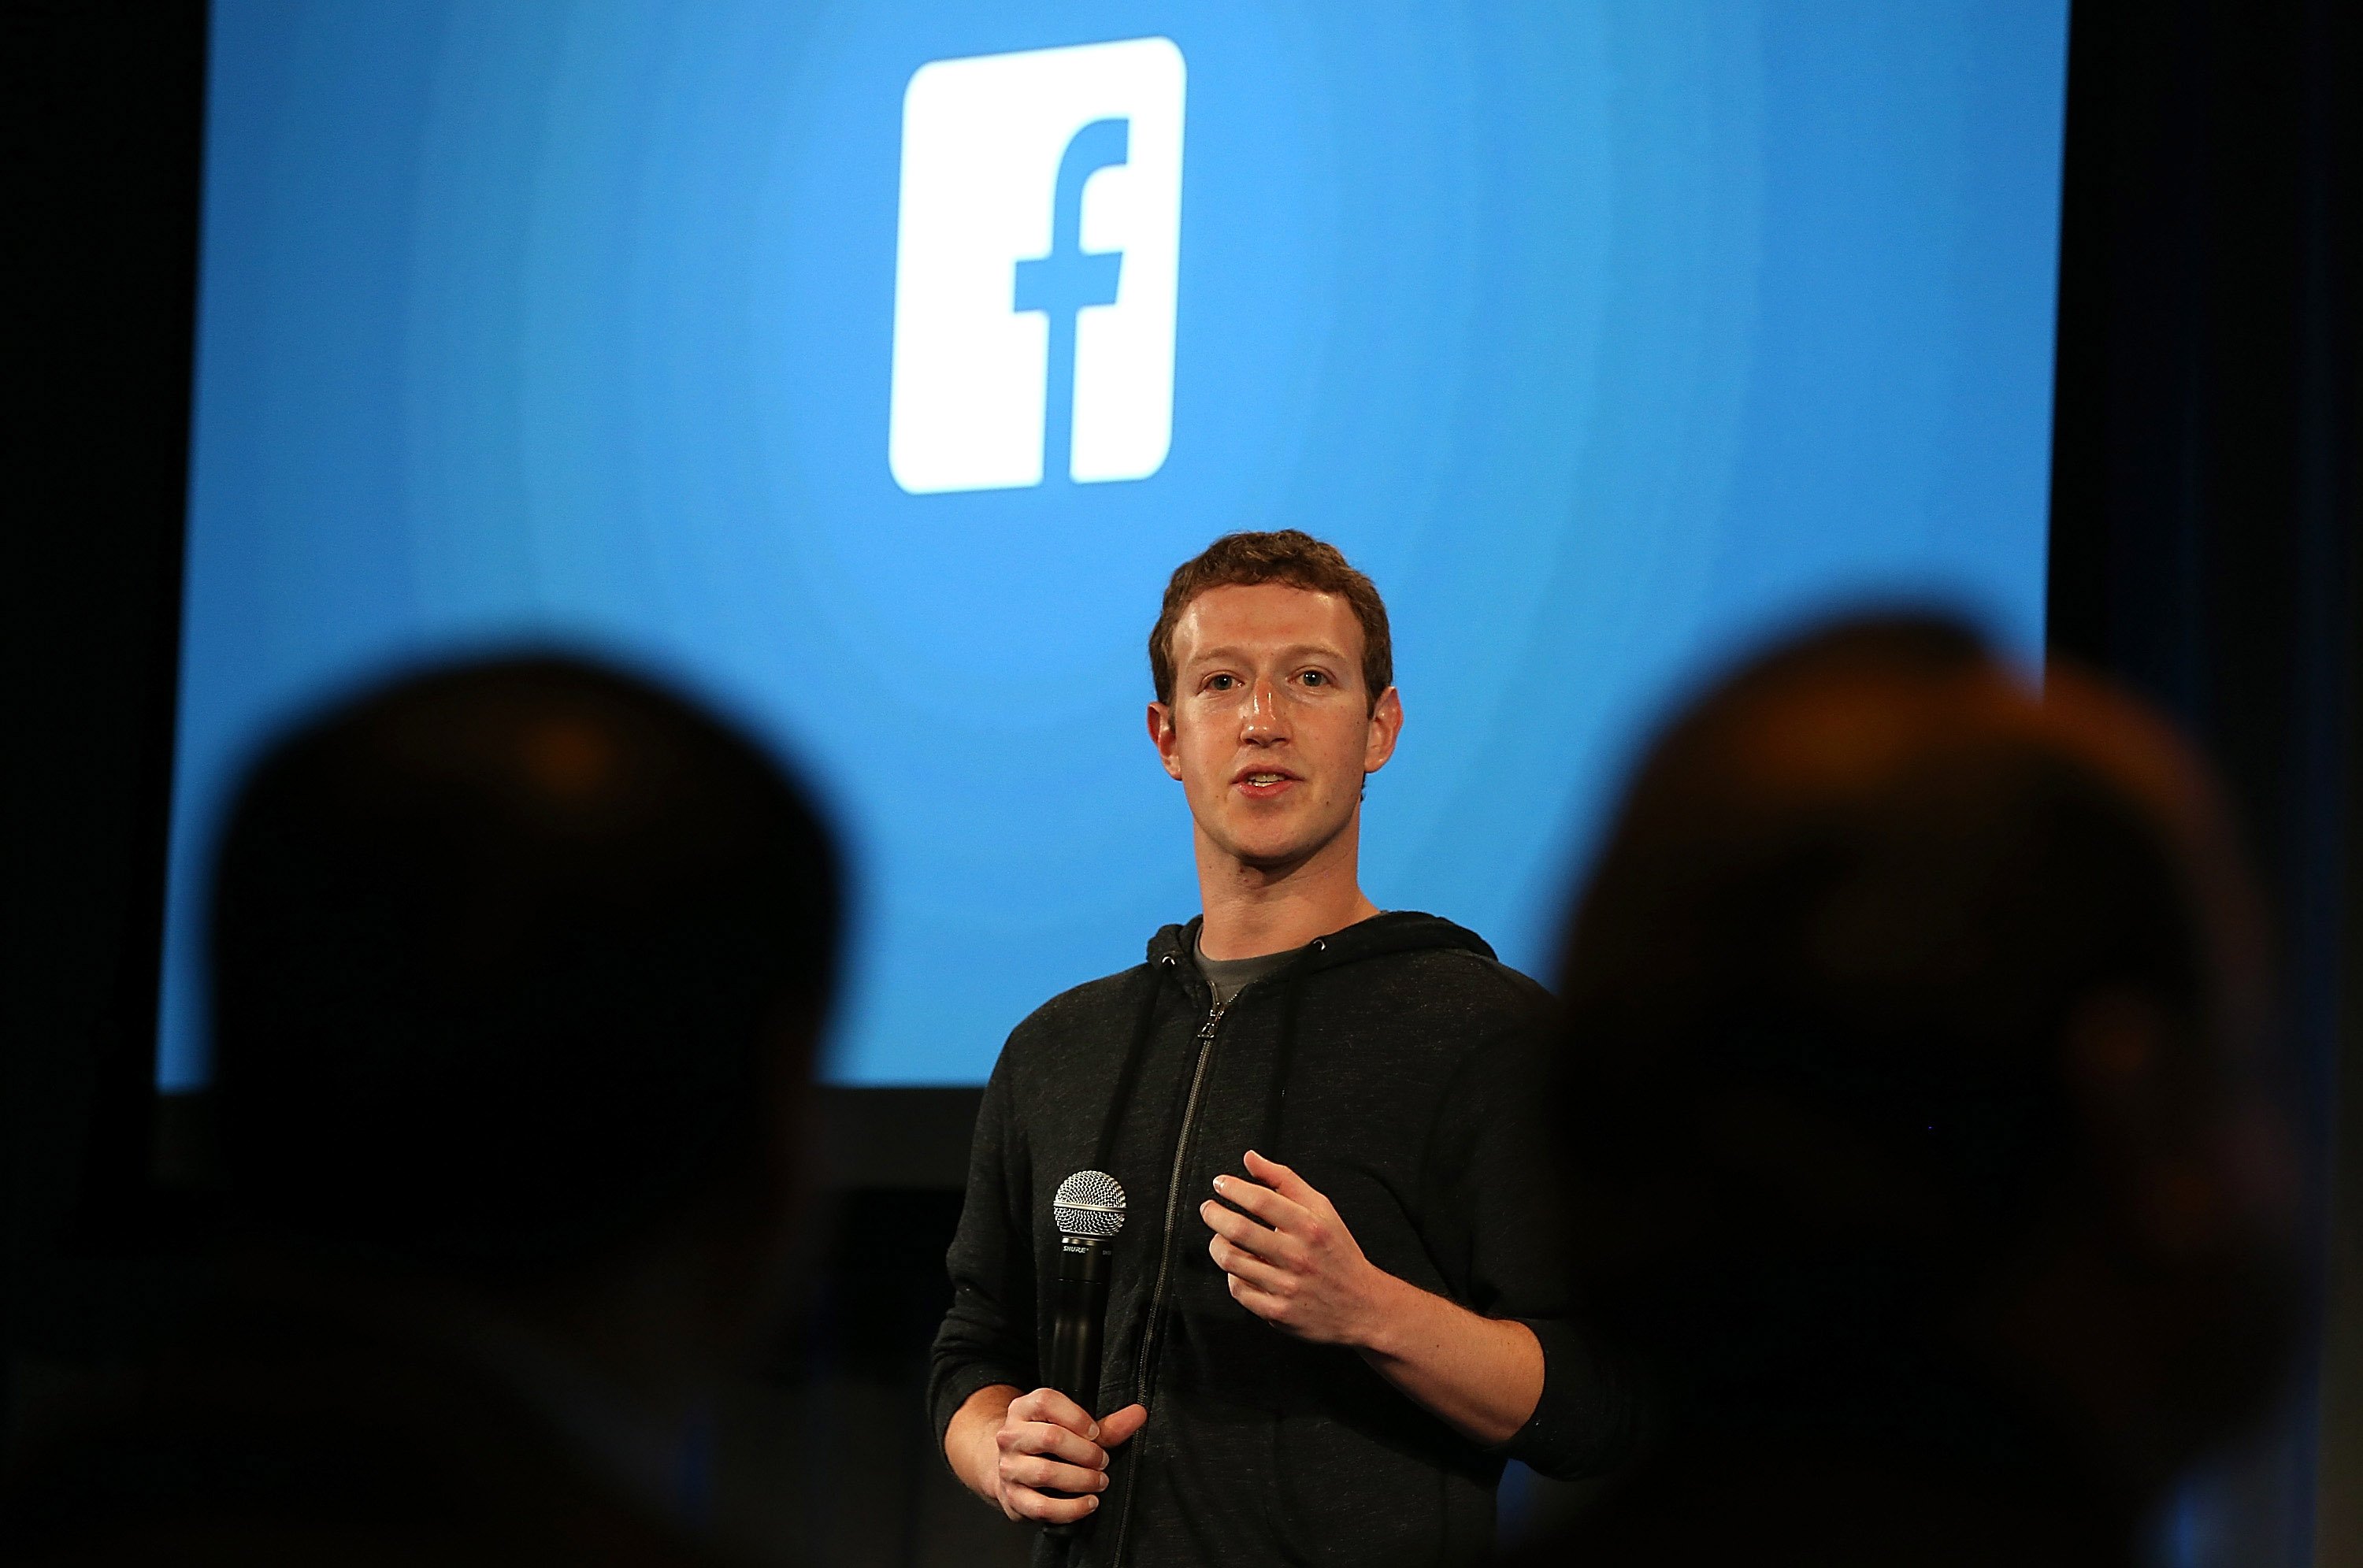 Facebook CEO Mark Zuckerberg speaks during an event at Facebook headquarters on April 4, 2013 in Menlo Park, California (Justin Sullivan—Getty Images)